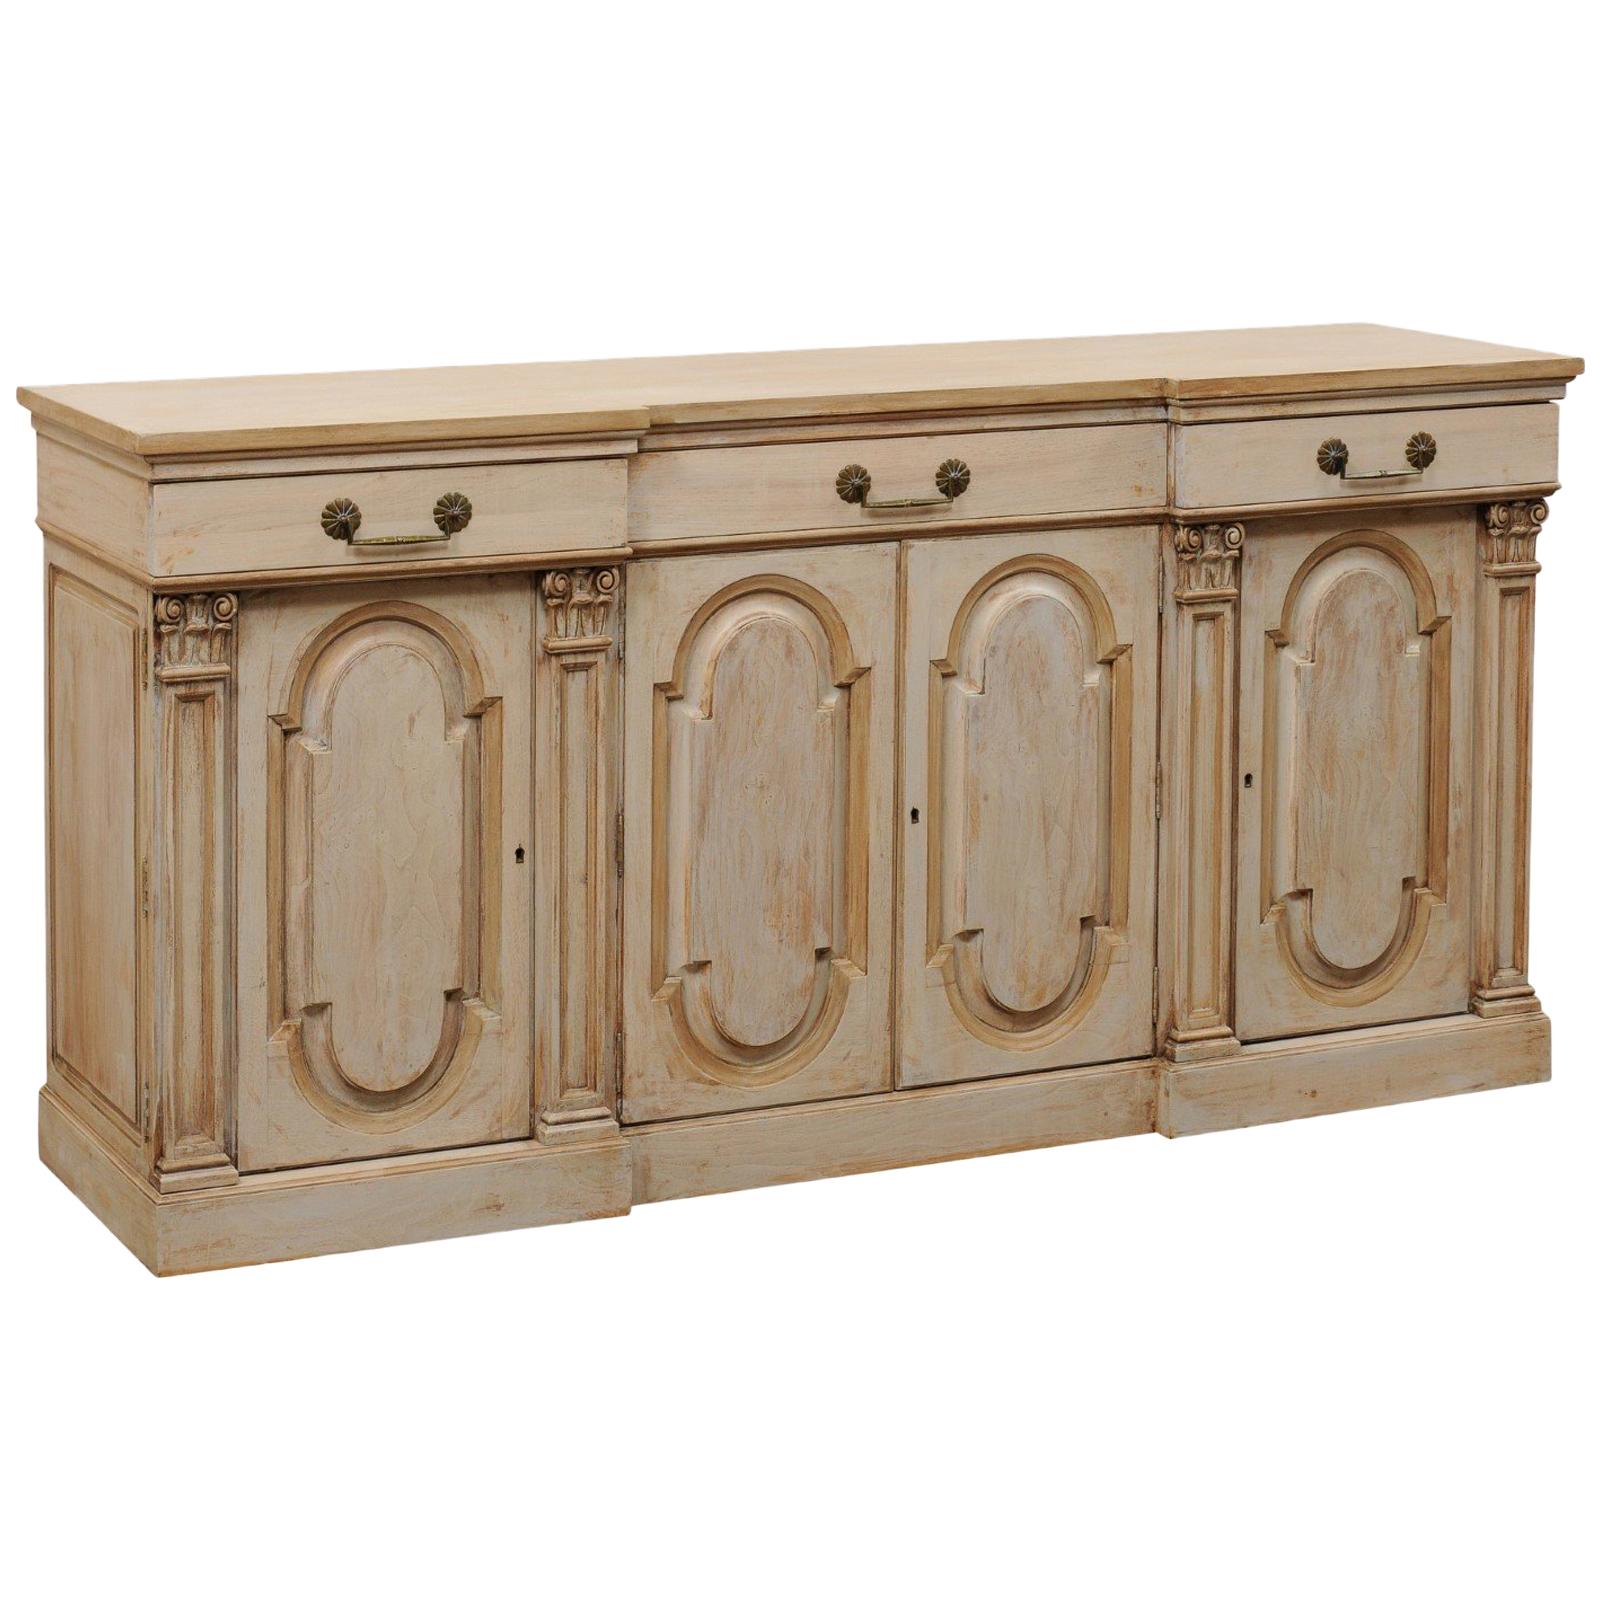 A Mid-20th C. 6 Ft Long Painted Wood Buffet Cabinet w/ Corinthian Column Accents For Sale